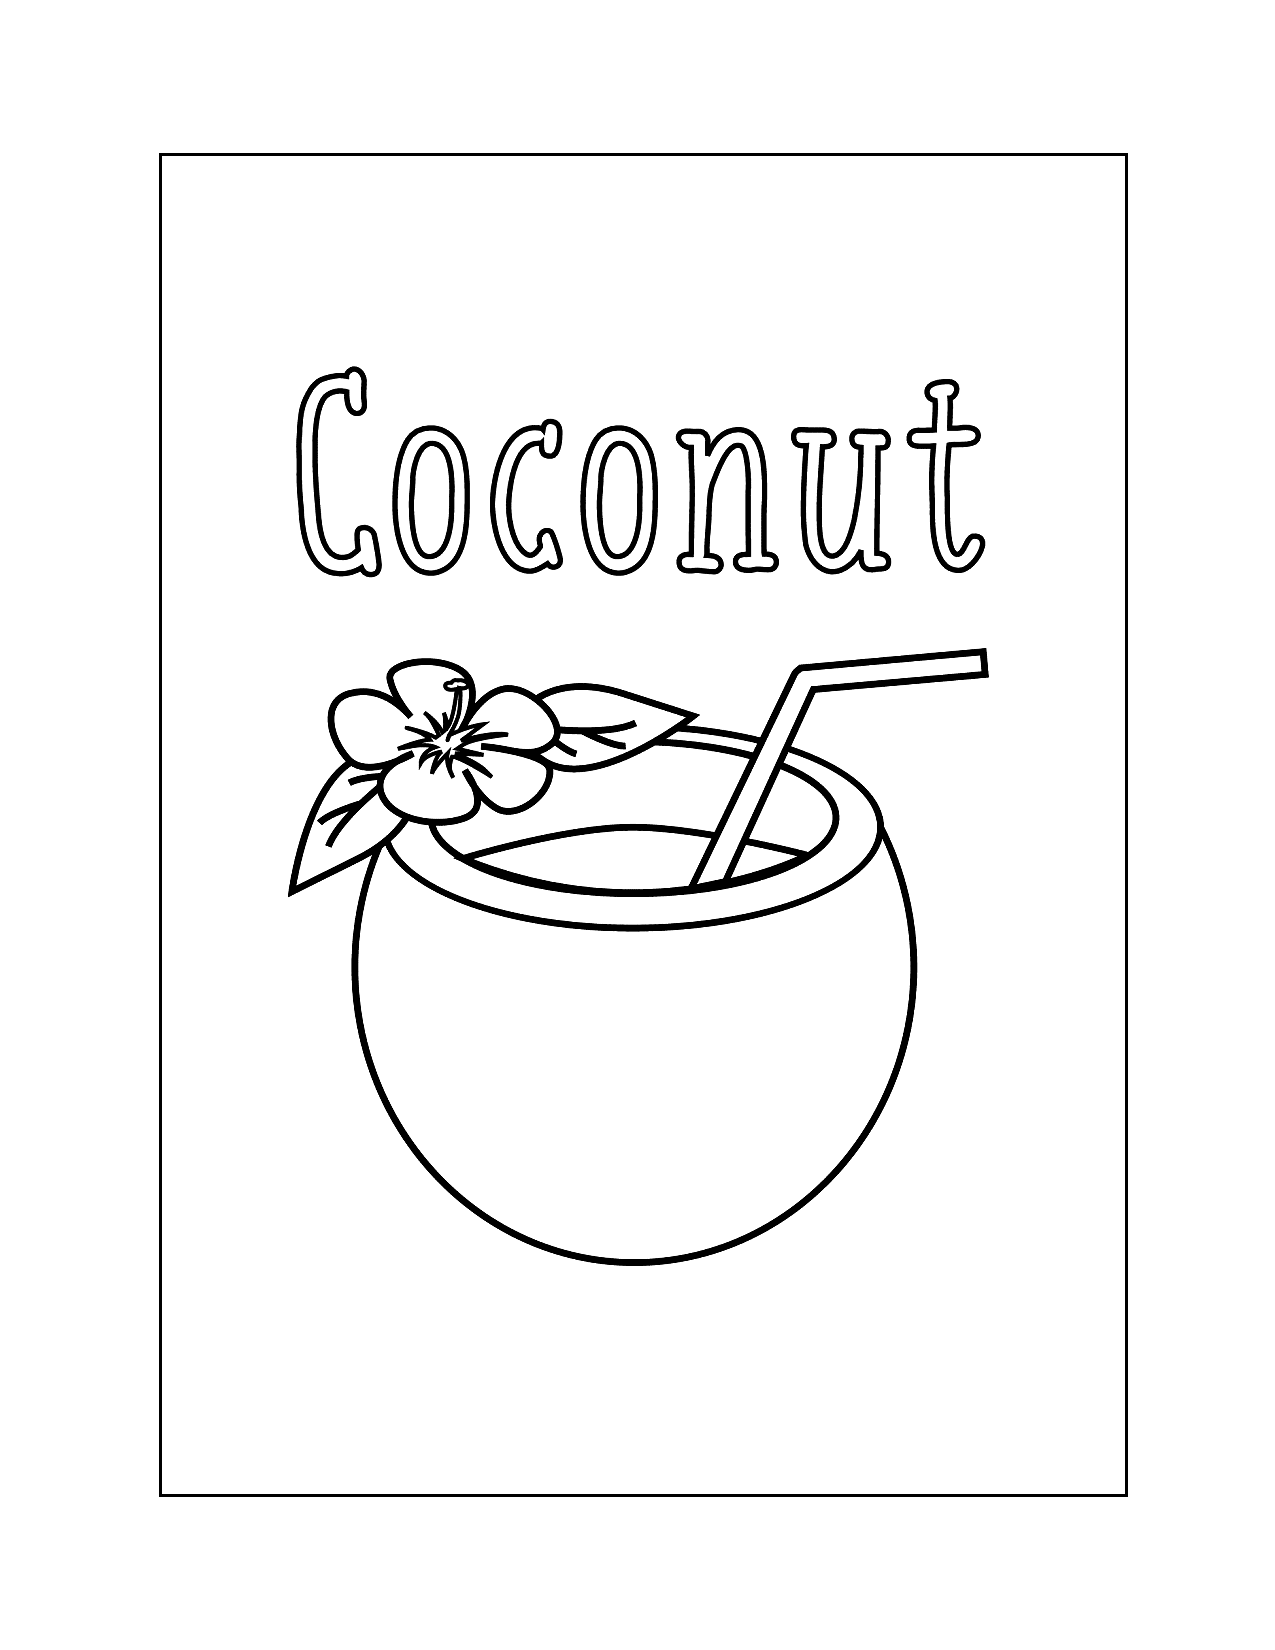 Drink In Coconut Coloring Page